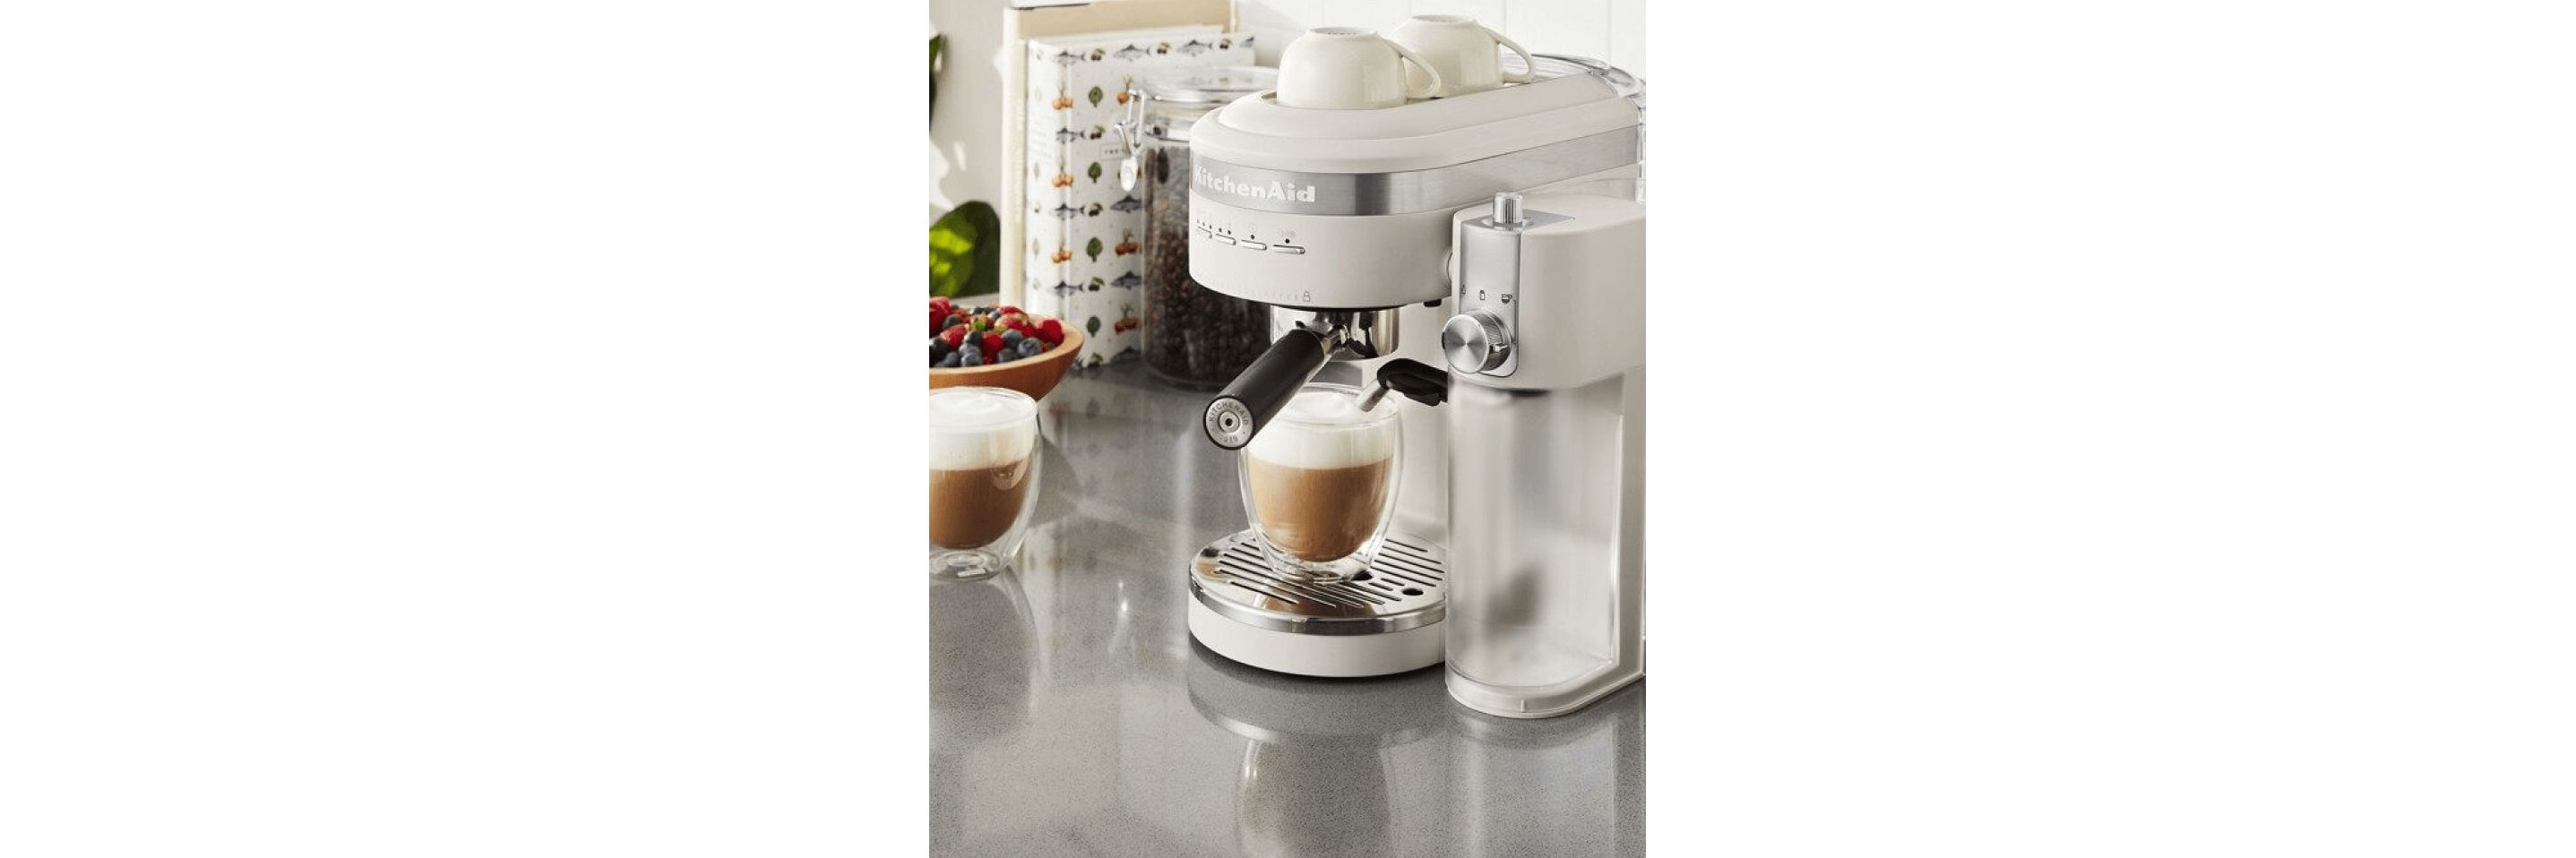 Kitchen Appliances to Bring Culinary Inspiration Life to KitchenAid 